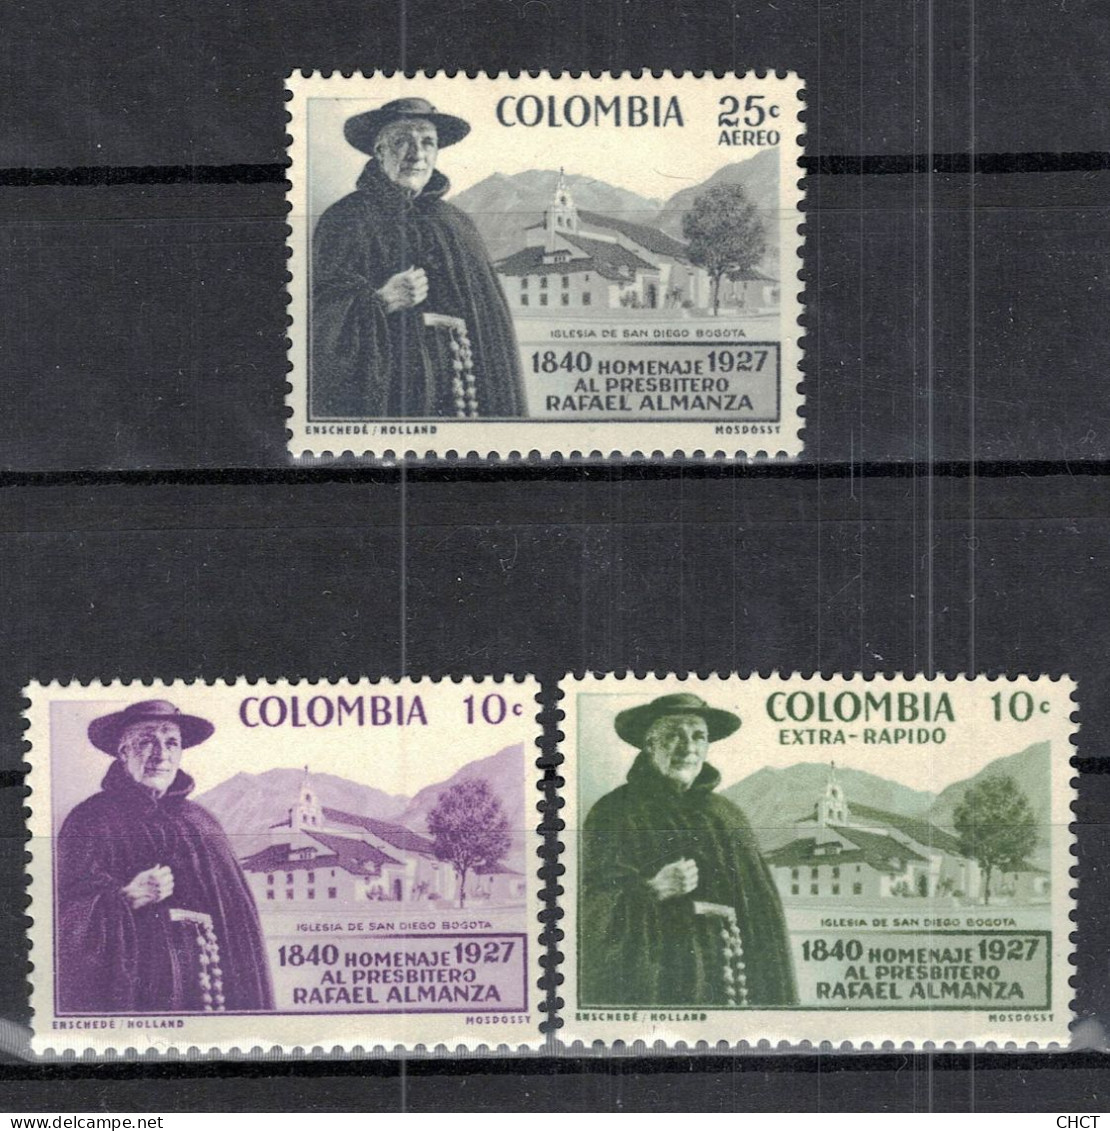 CHCT85 - Father Almanza Commemoration, Complete Series, MH, 1958, Colombia - Kolumbien